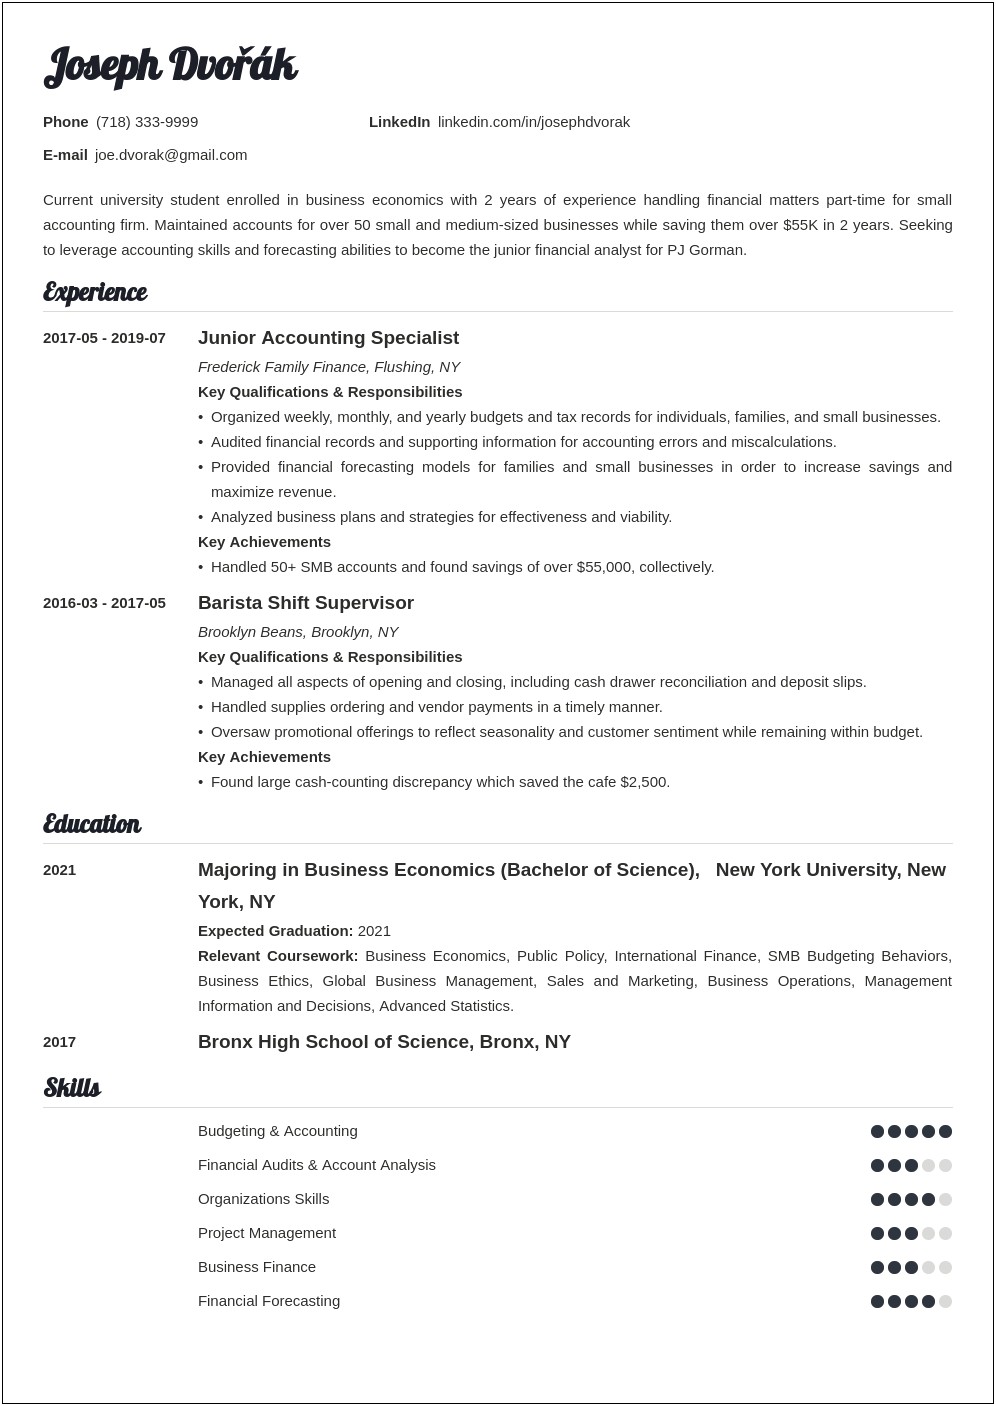 Microsoft Word 2013 Resume Opening Everything Shifted